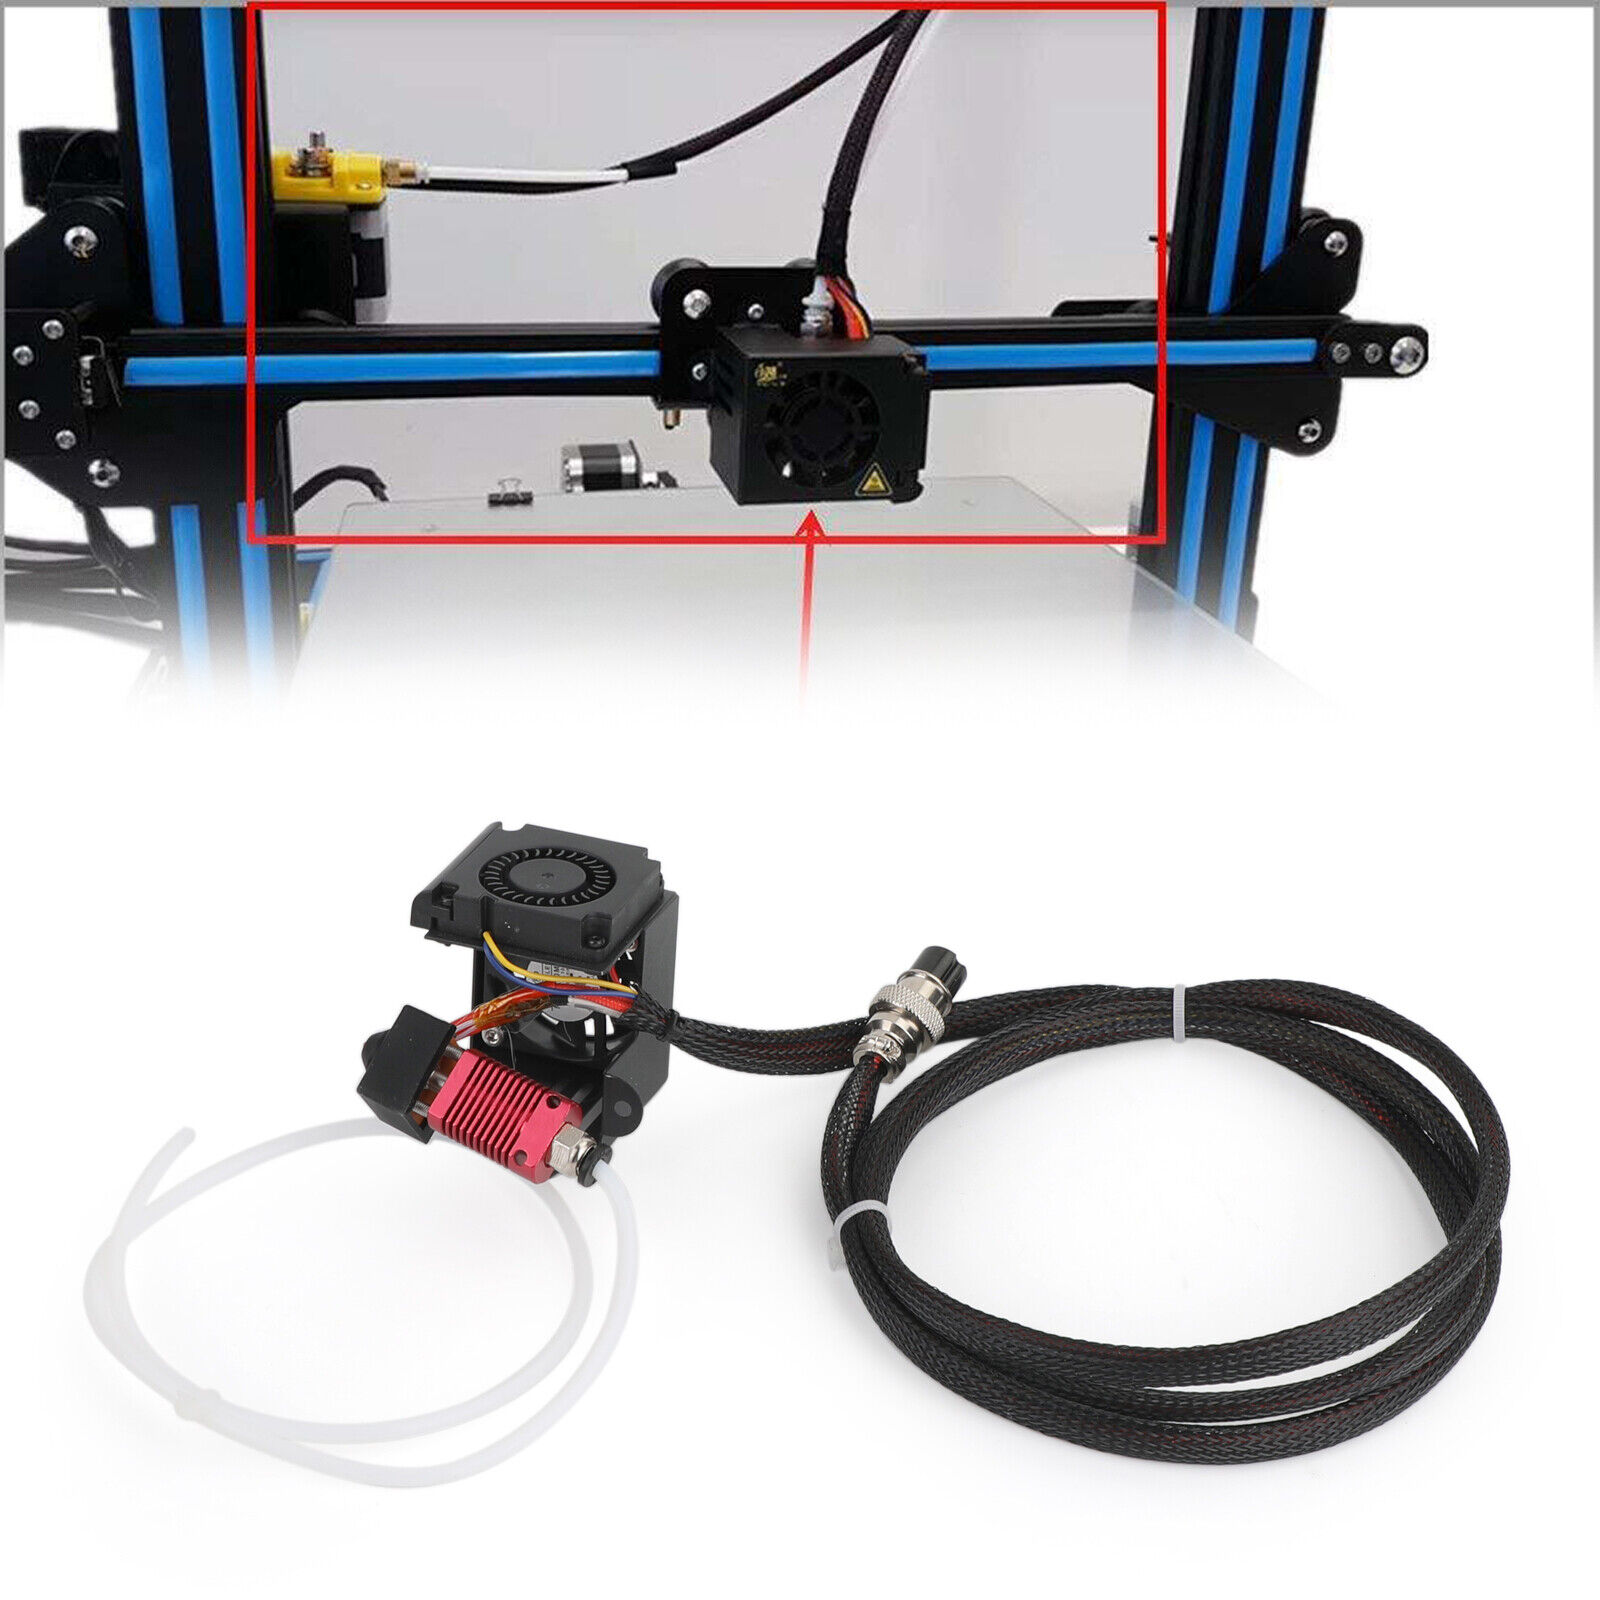 MK8 Full Extruder Kits 0.4mm Nozzle Hot End for CR-10 S5 500*500*500mm E4